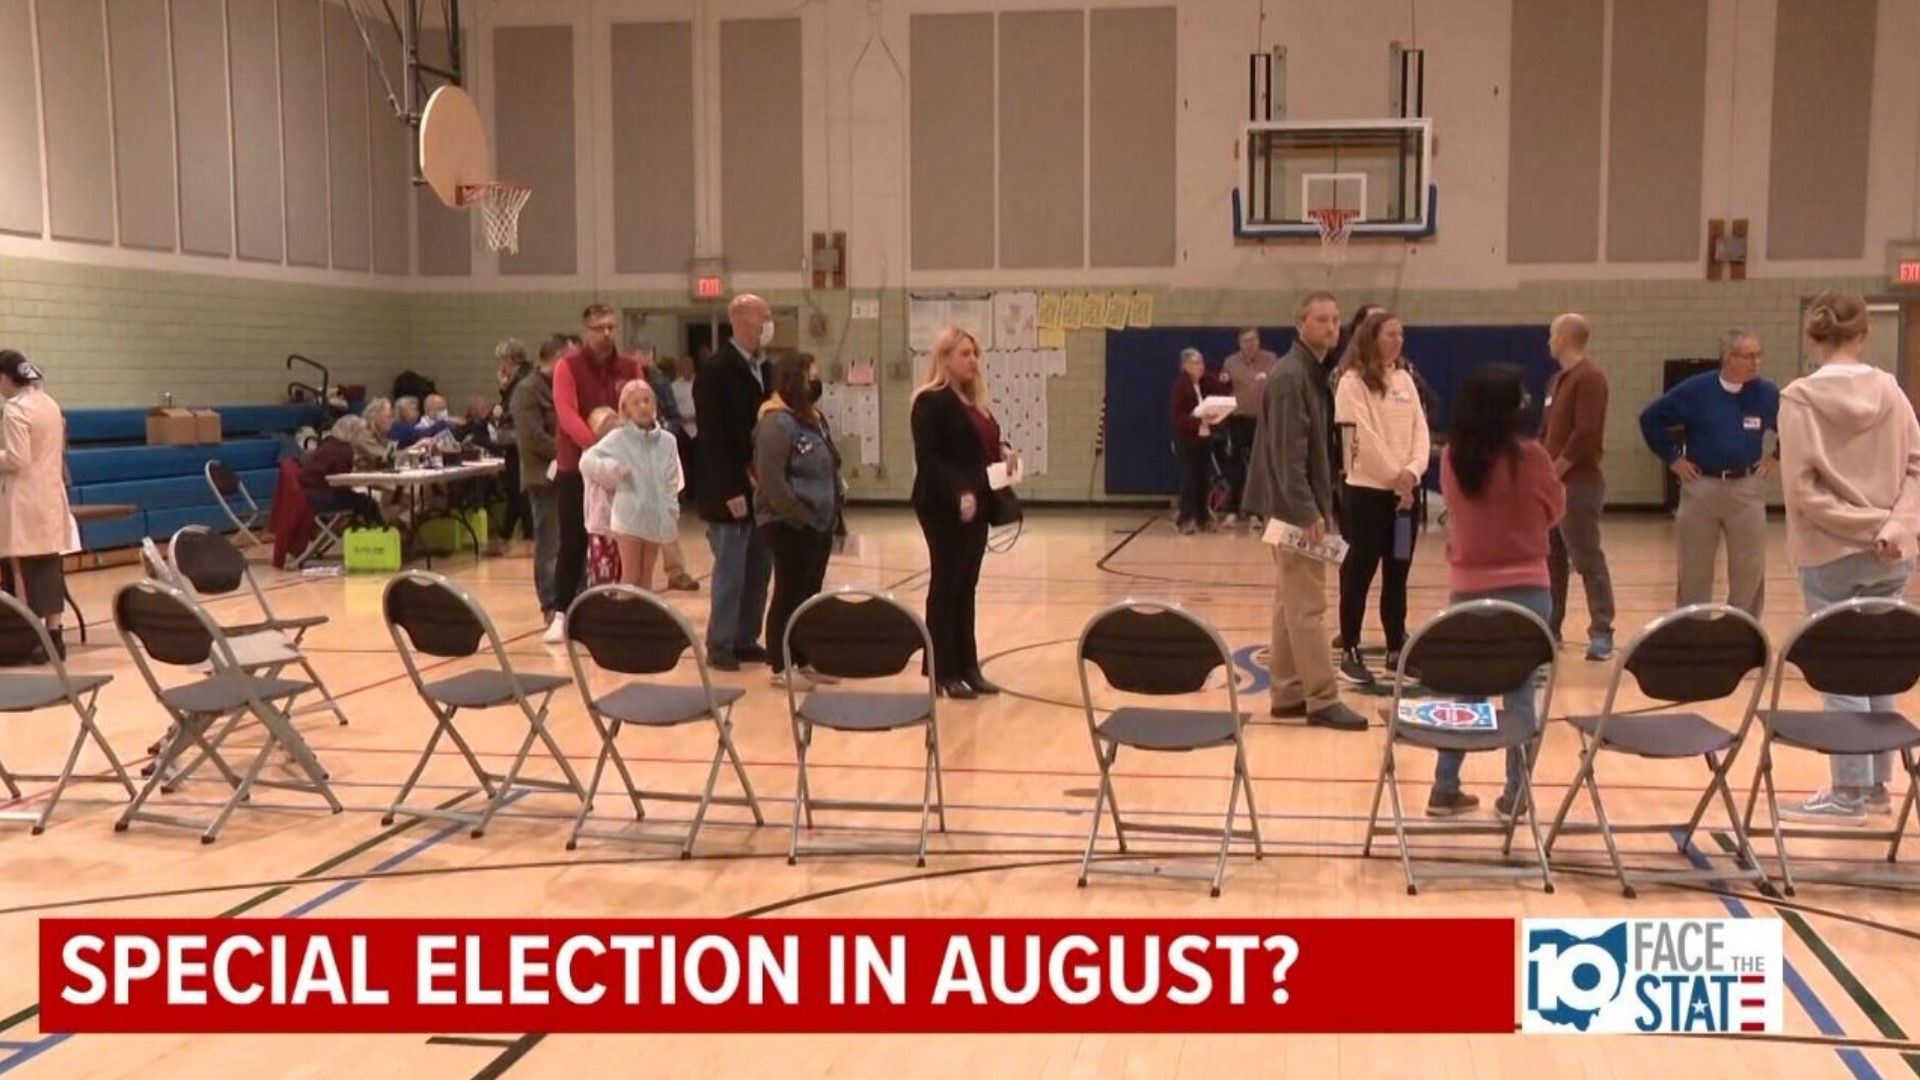 On this week's Face the State, we take a look at early voting in Ohio and the possibility of a special election in August.